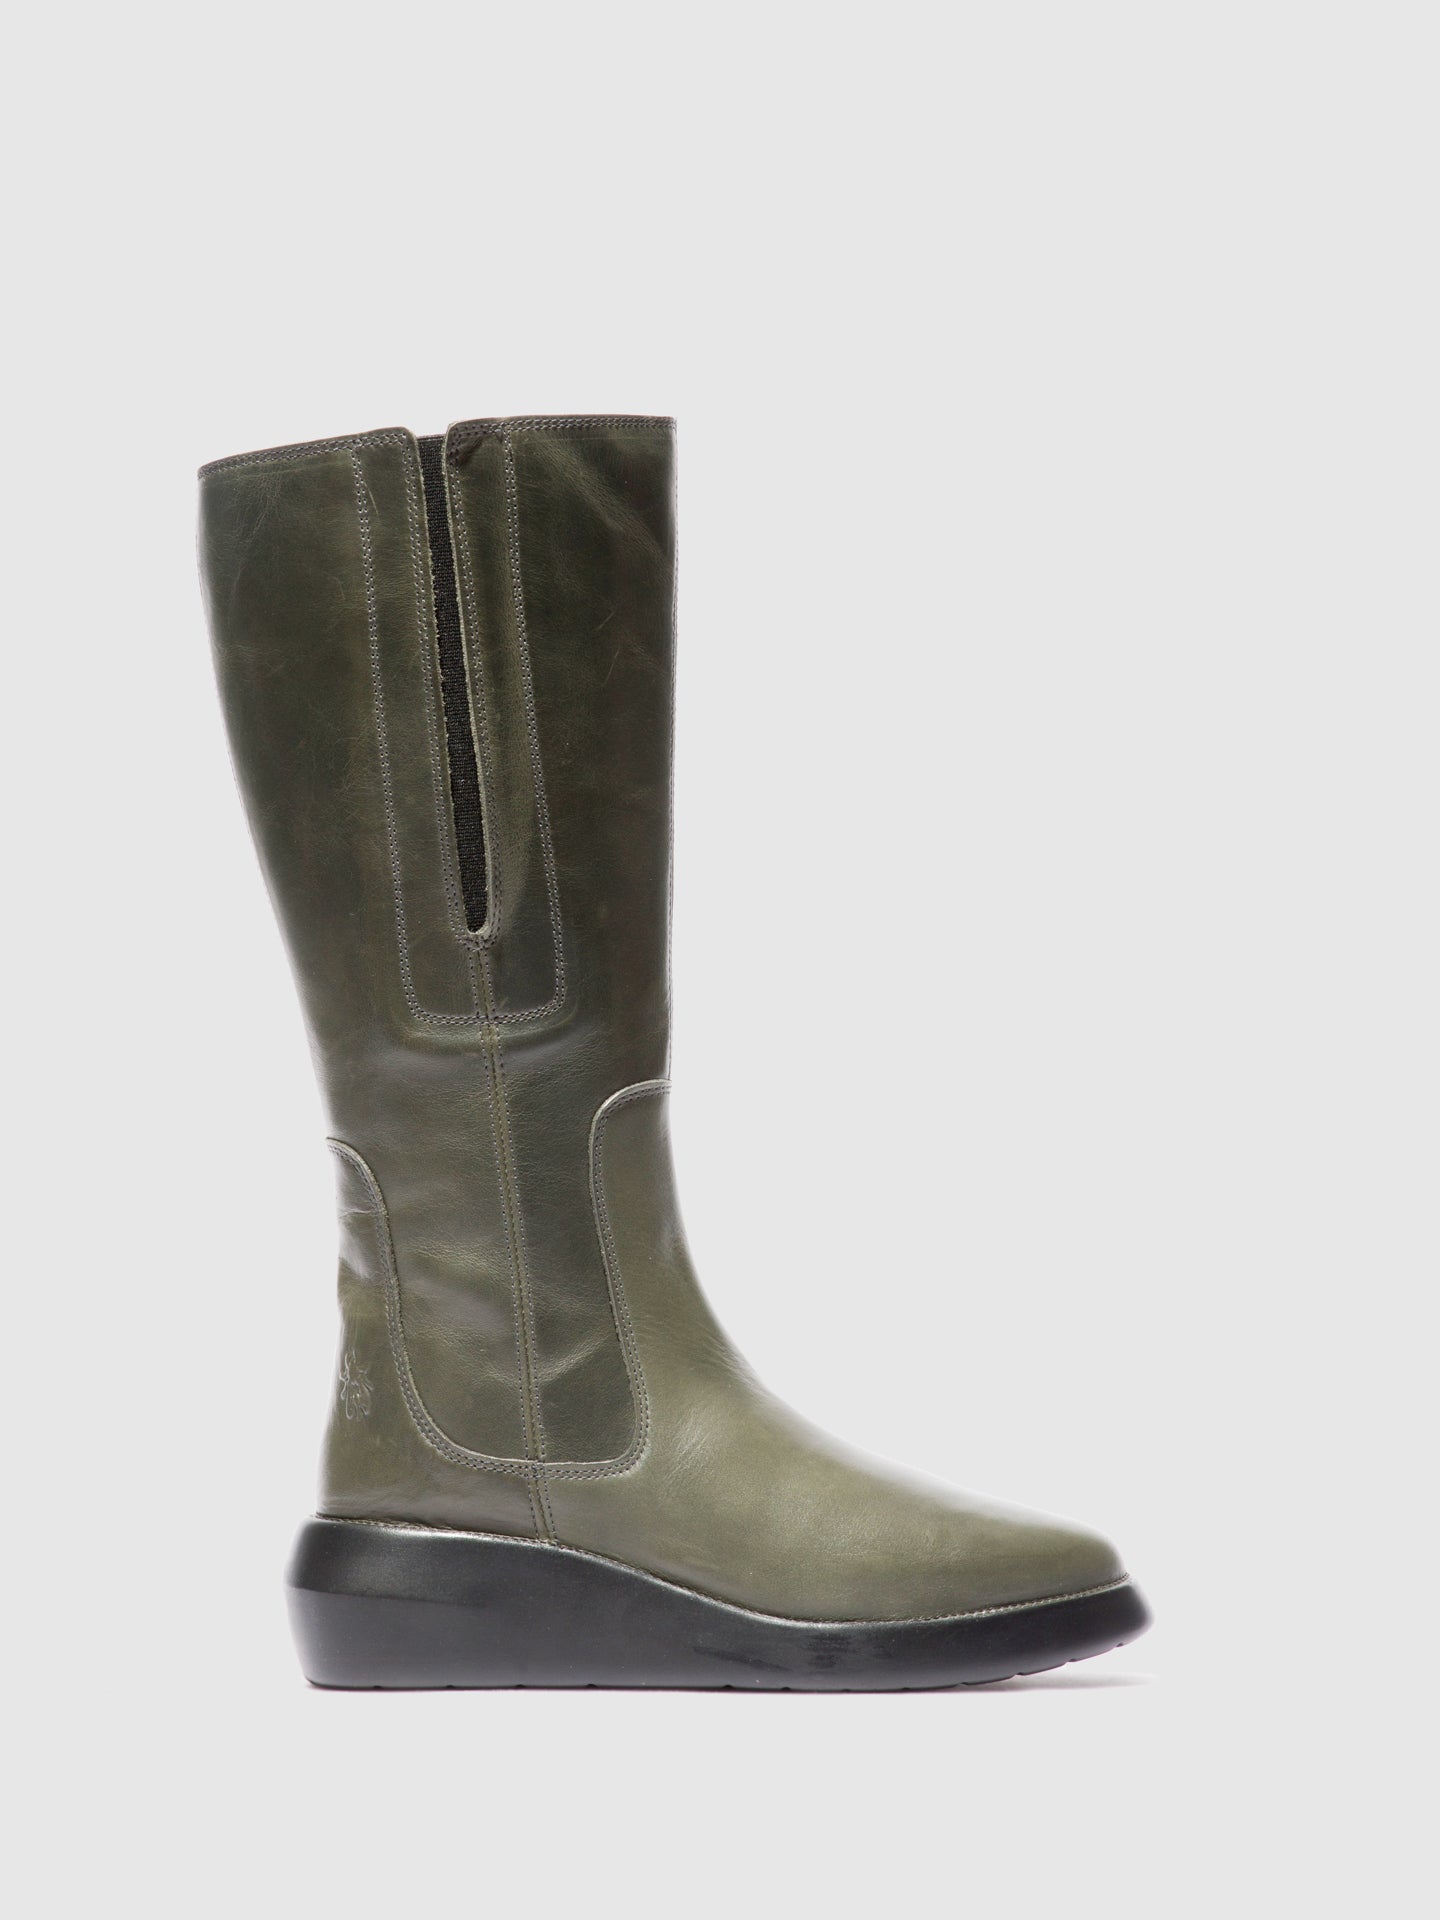 Fly London Zip Up Boots BOLA503FLY RUG DIESEL